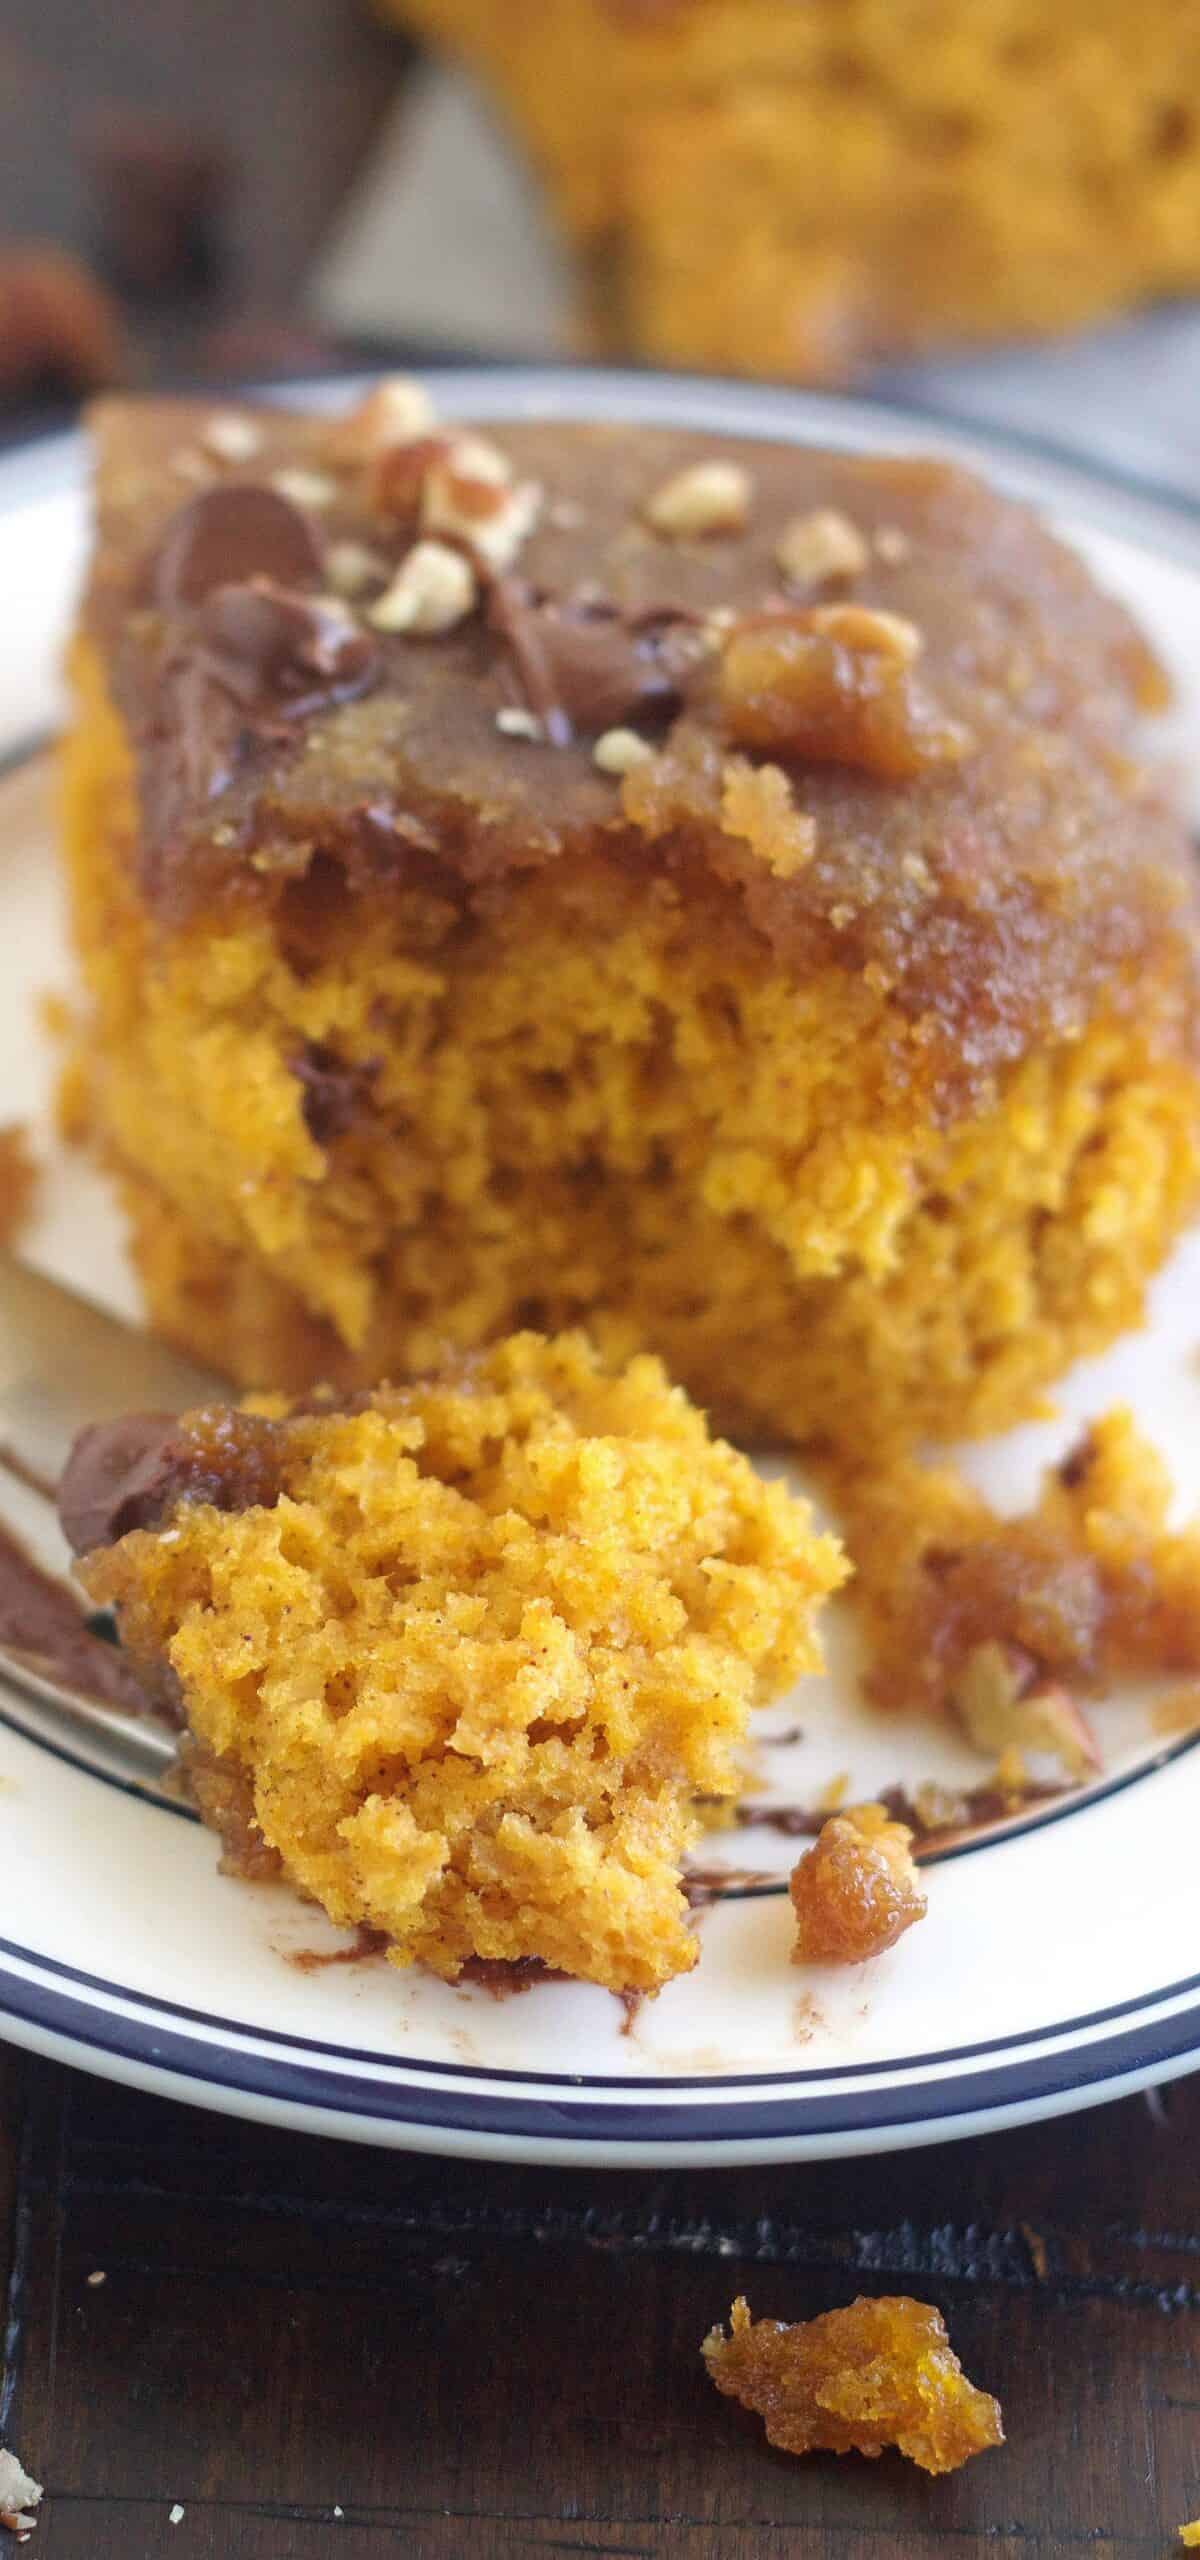  With its irresistible caramel topping and fluffy pumpkin batter, this cake is an absolute showstopper!